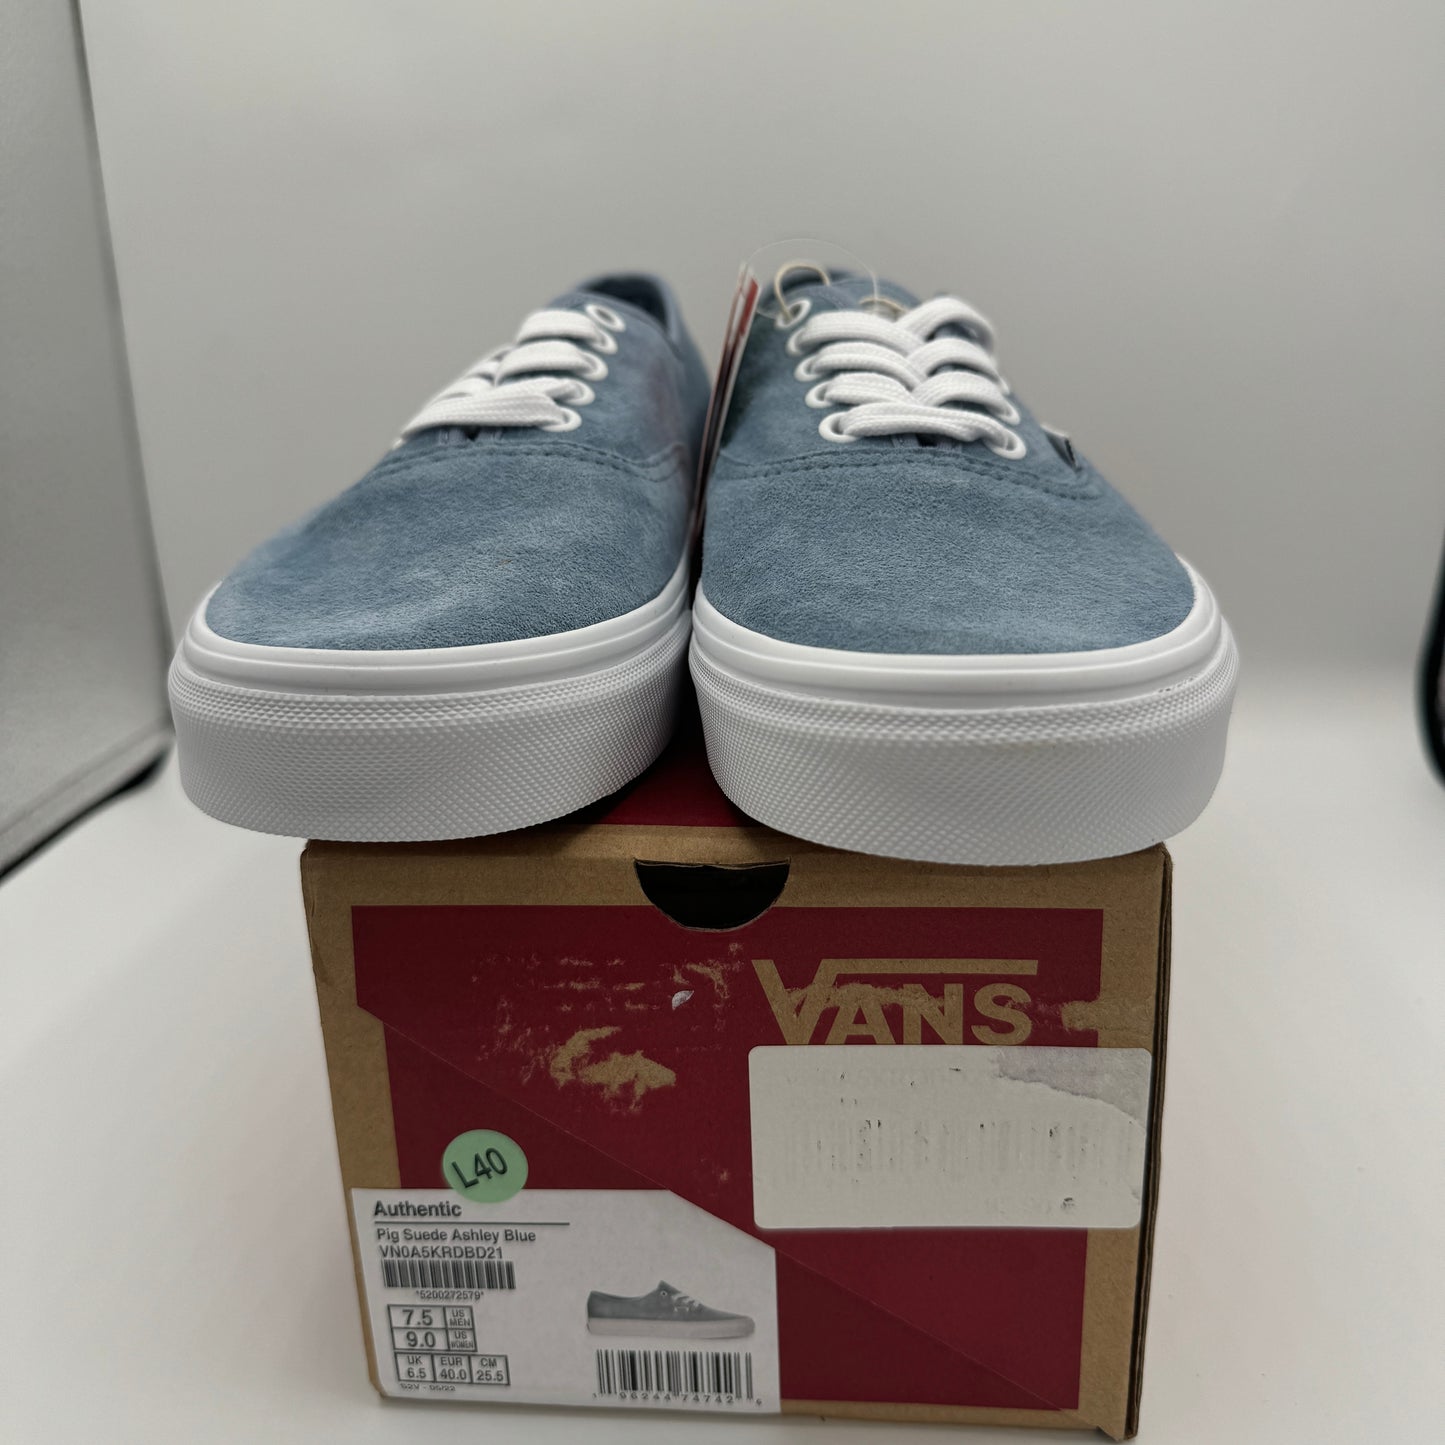 Vans Authentic Low Top Sneakers in Blue Ashley Pig Suede Leather